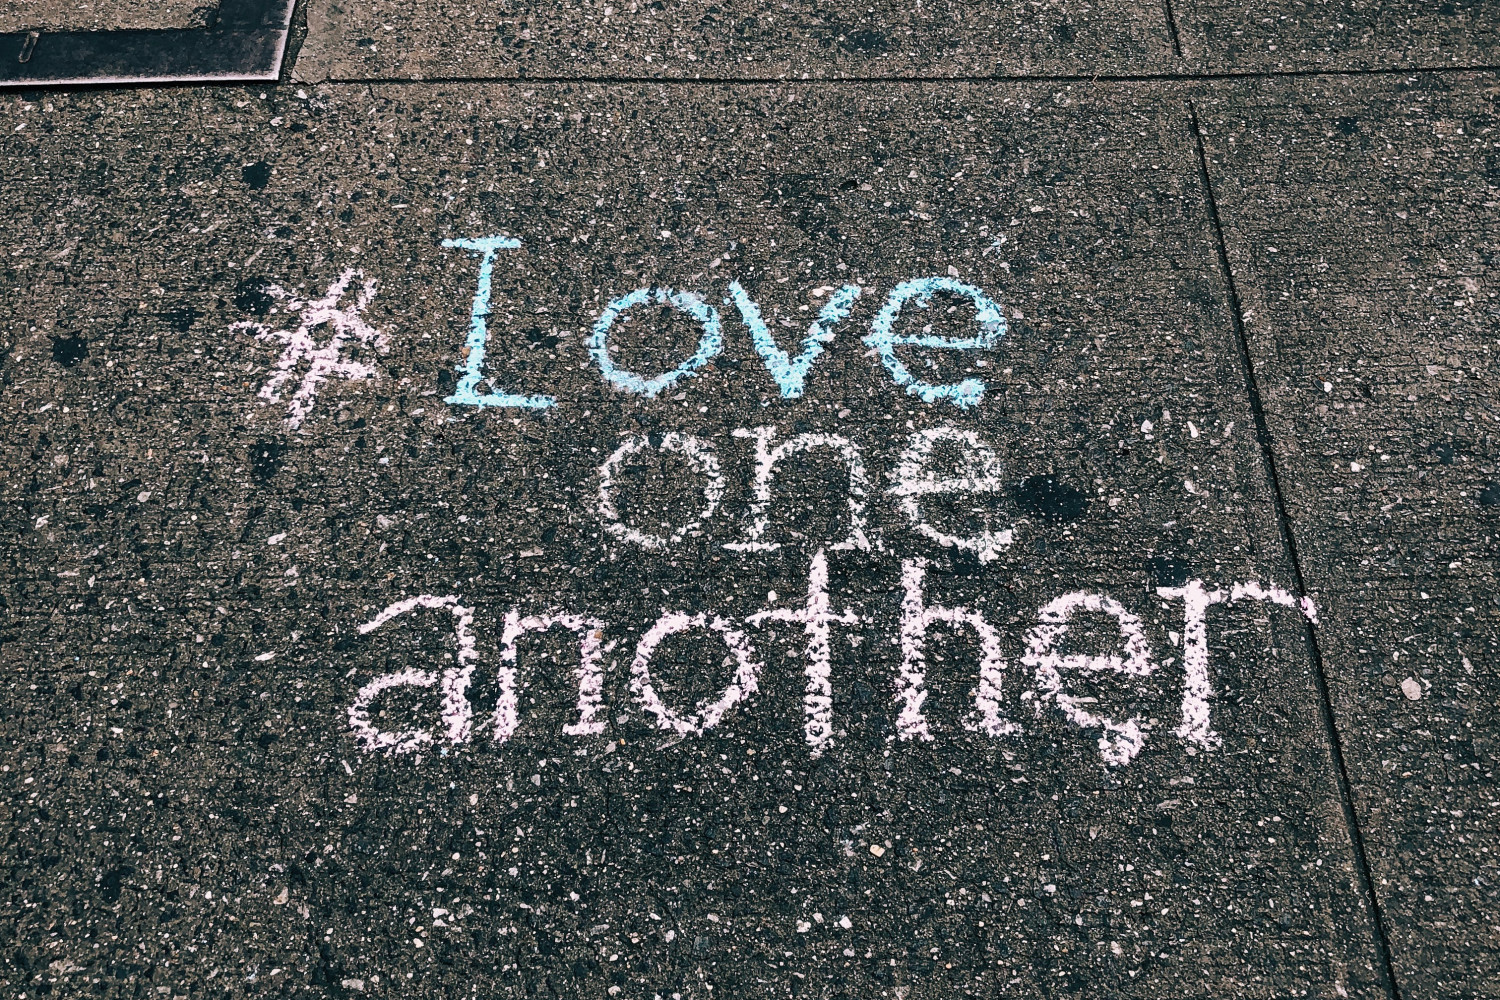 Image of pavement with 'Love one another' written in chalk